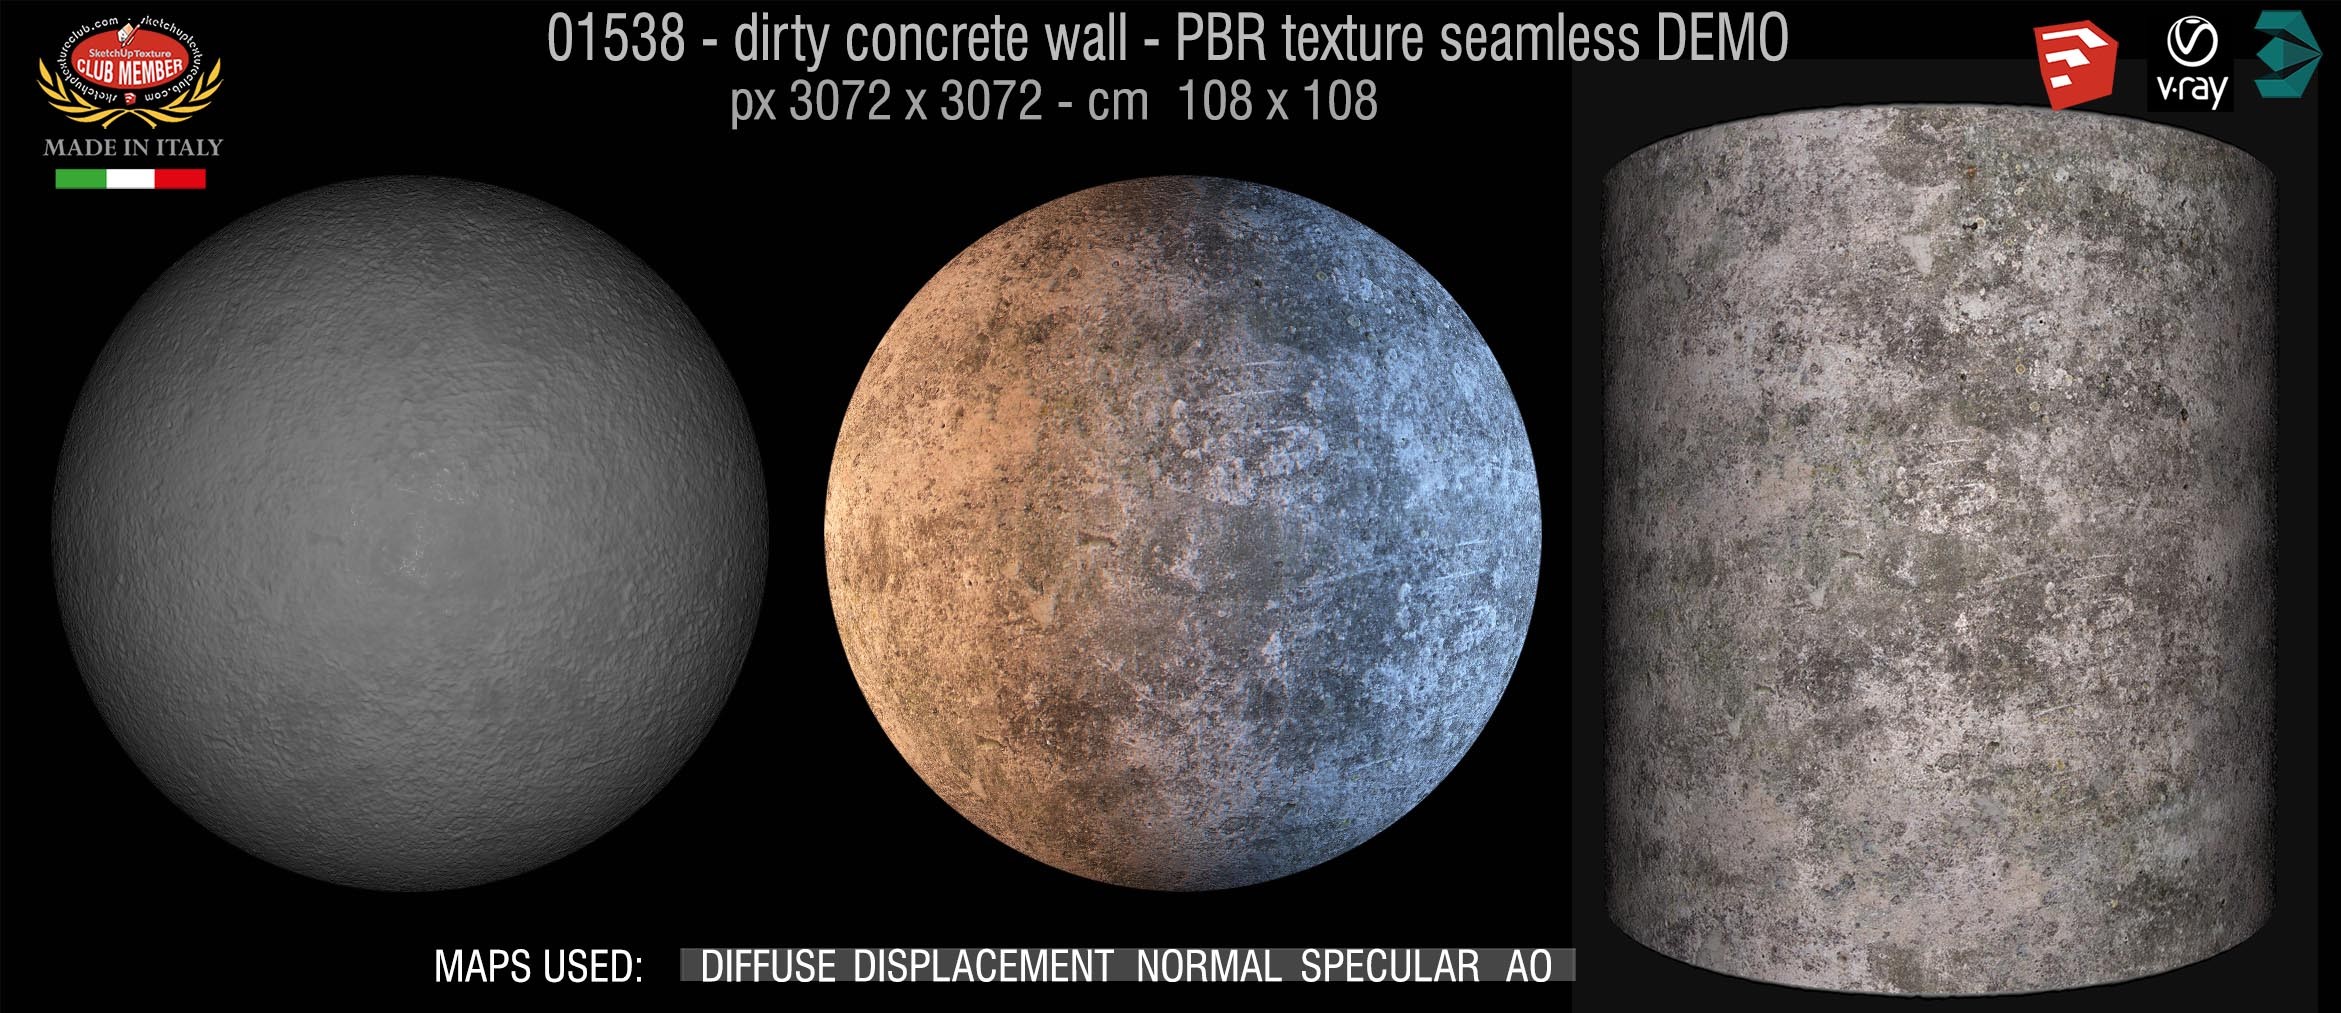 01538 Concrete bare dirty wall PBR texture seamless DEMO